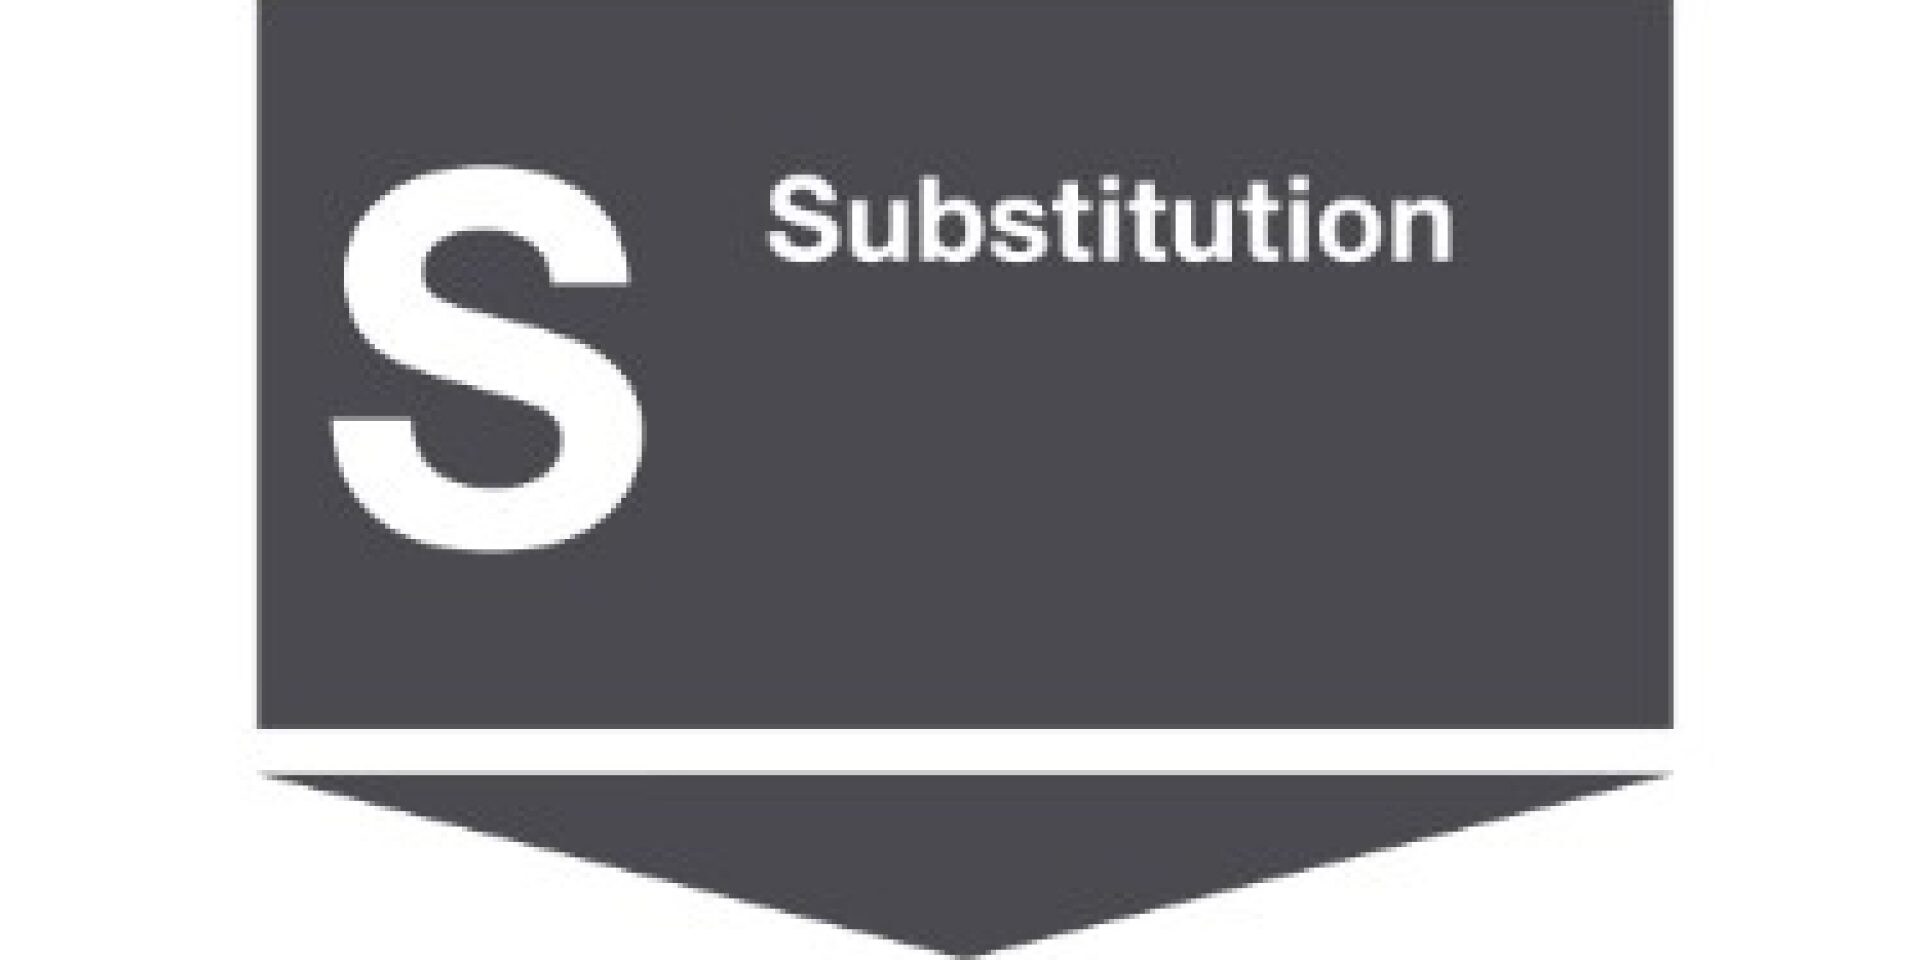 Substitution as a first step in the workflow of the "Stop principle"